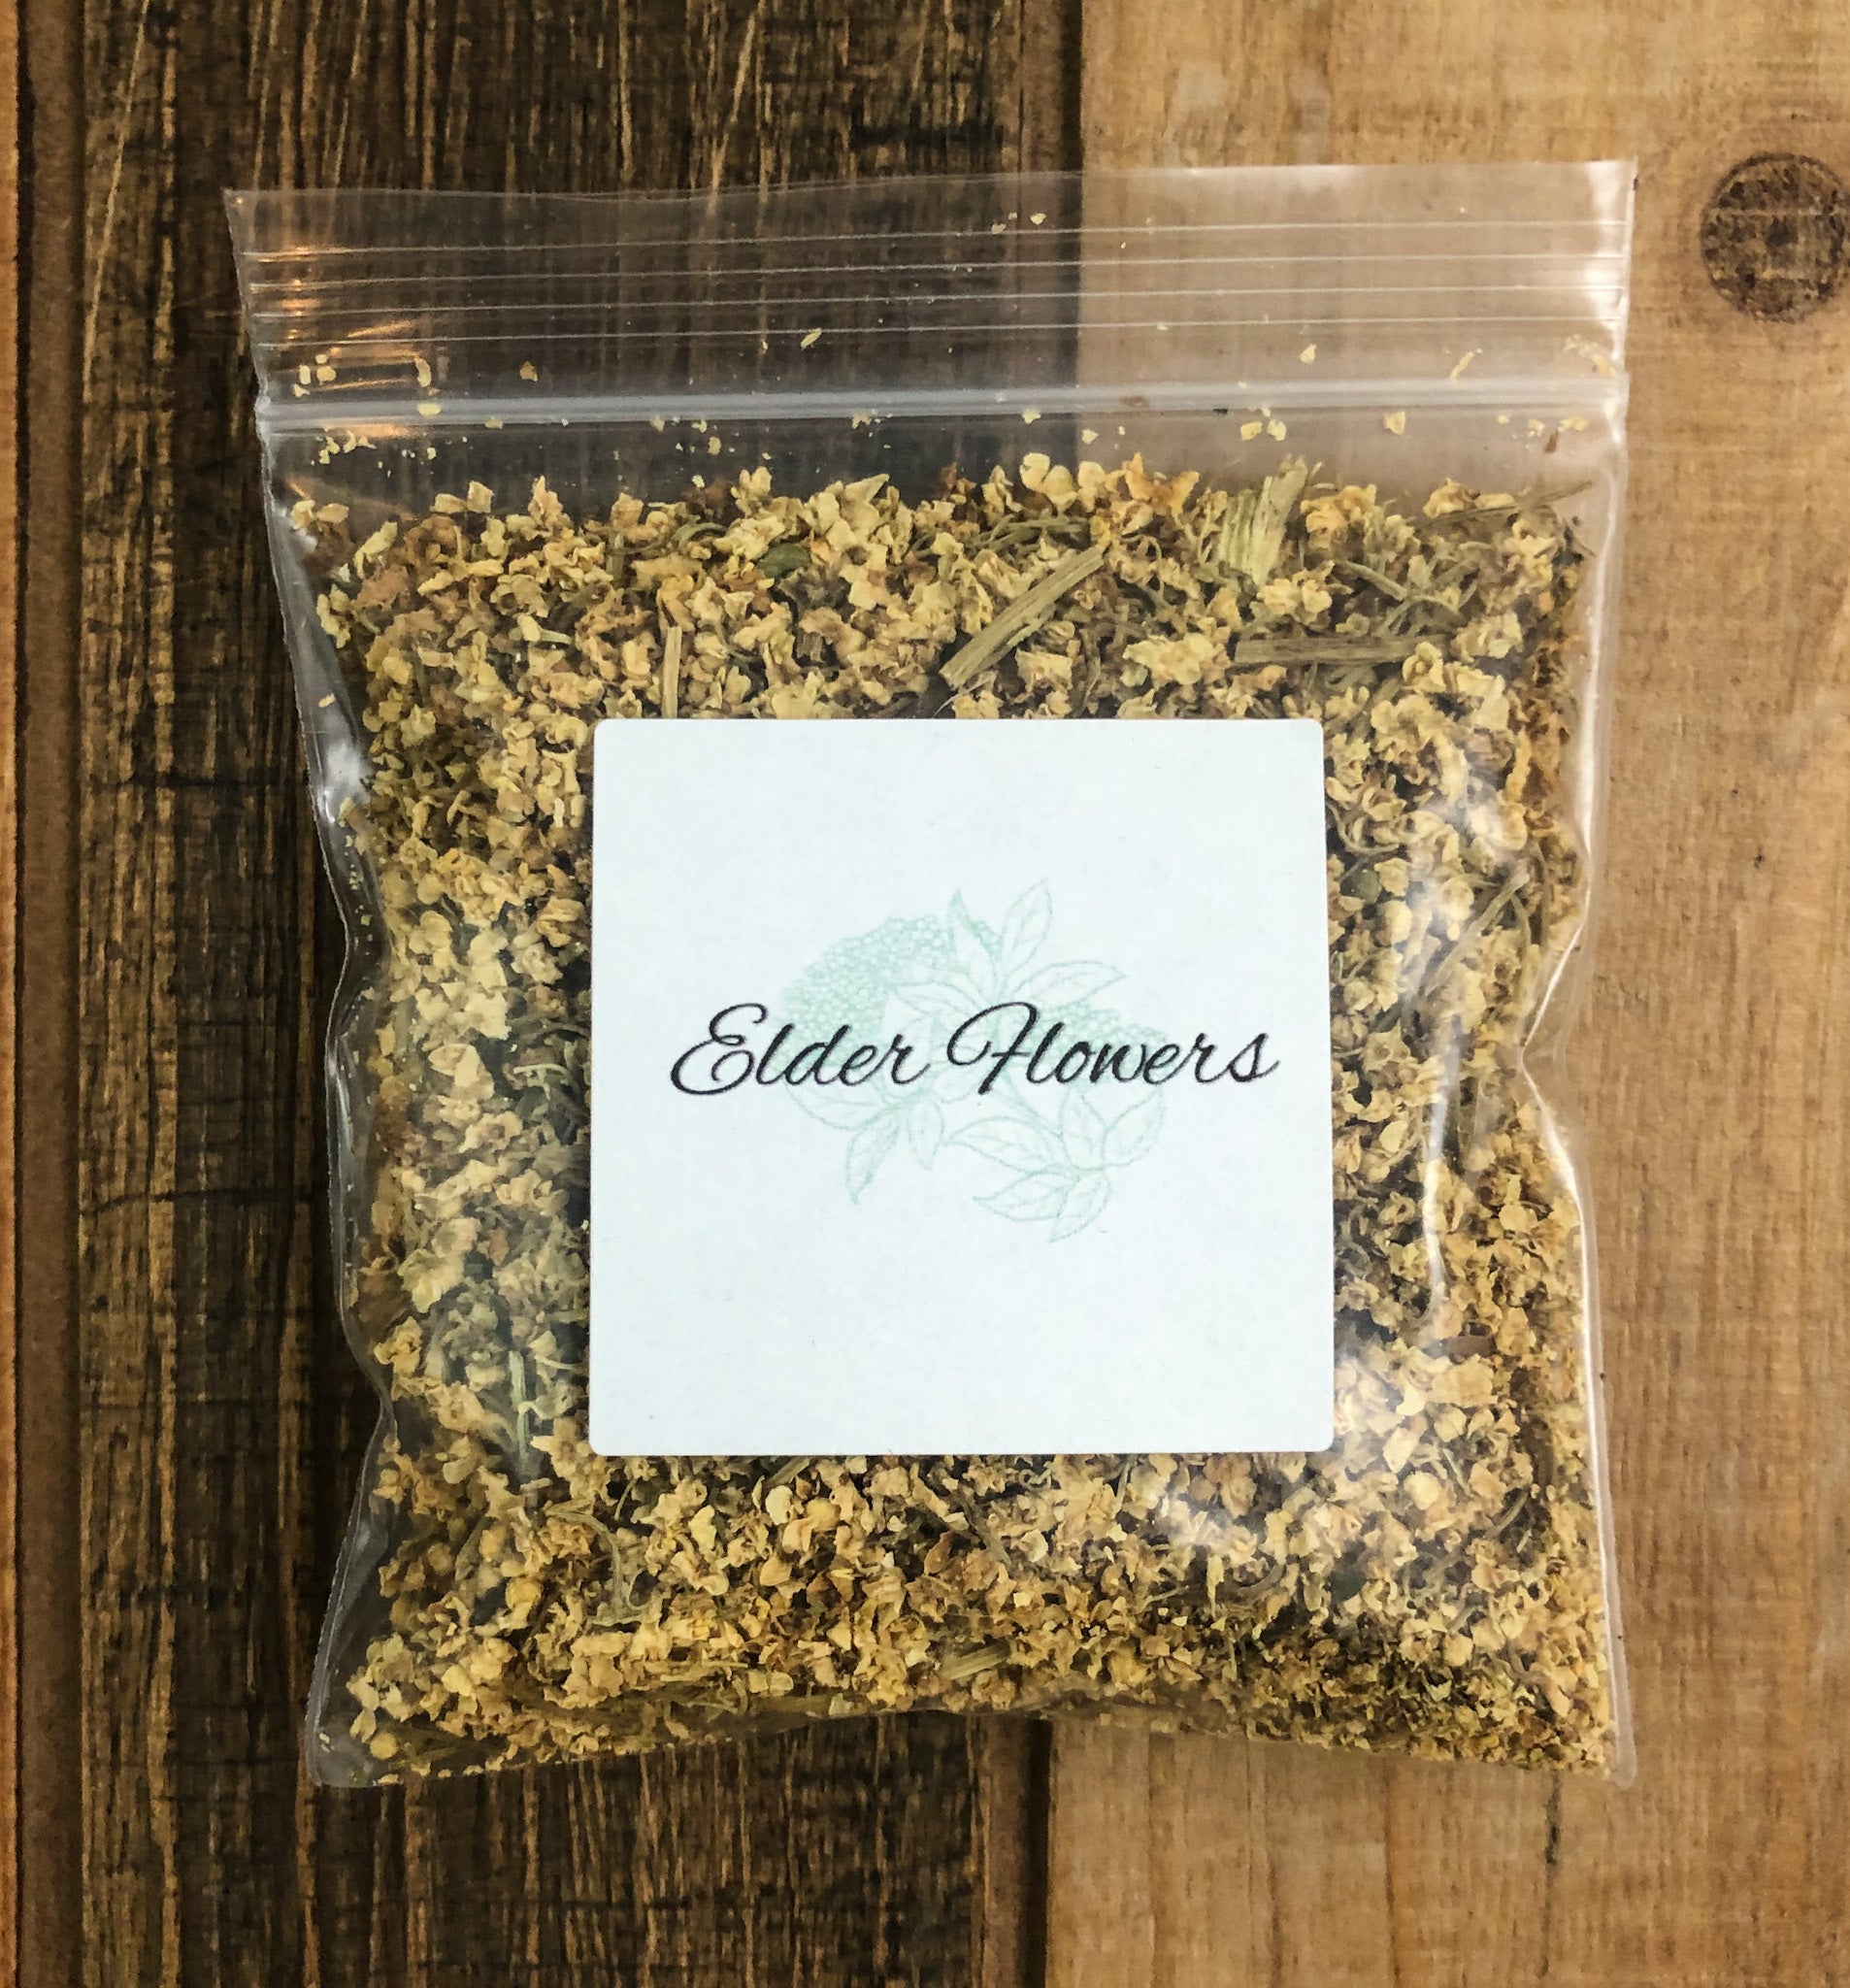 8g bag of dried elder flowers in a clear plastic bag with a wooden background